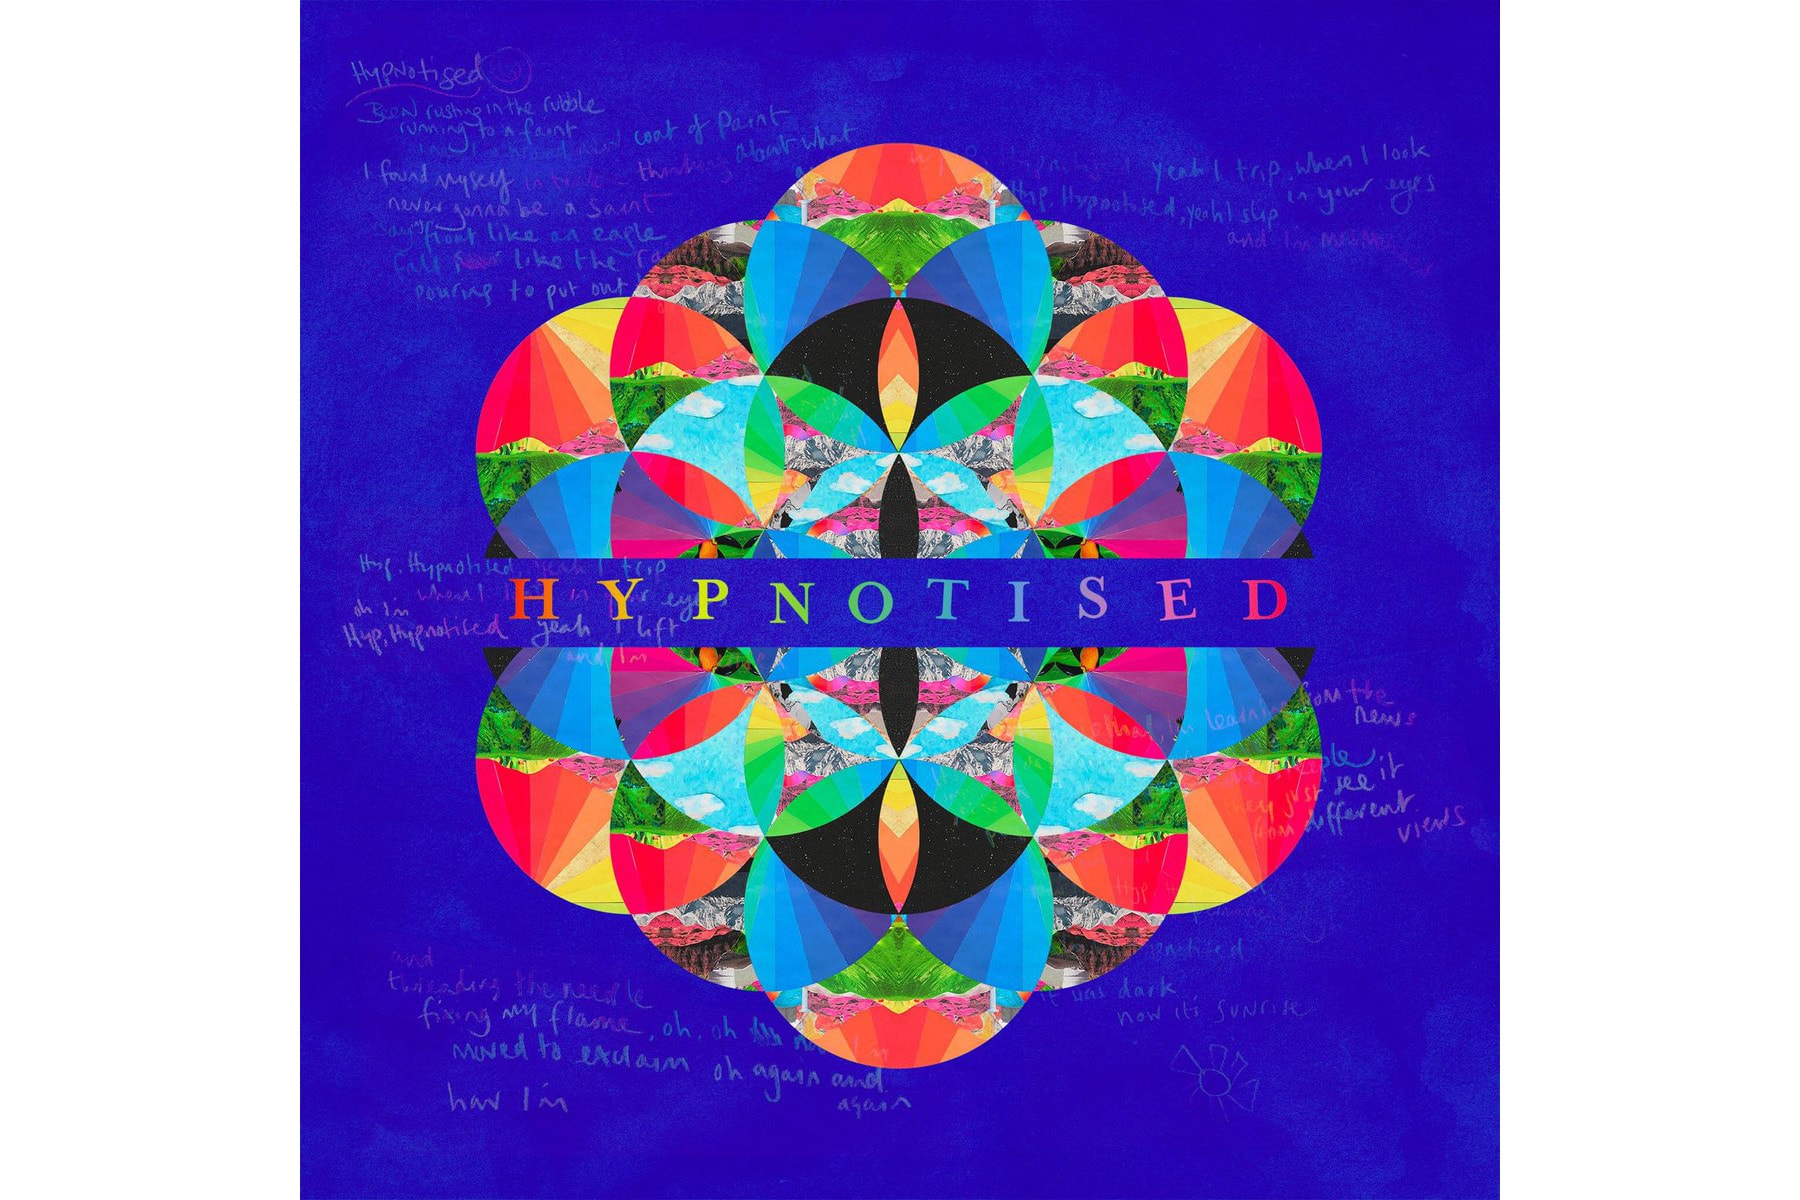 Coldplay released a new song Hypnotised from Kaleidoscope EP